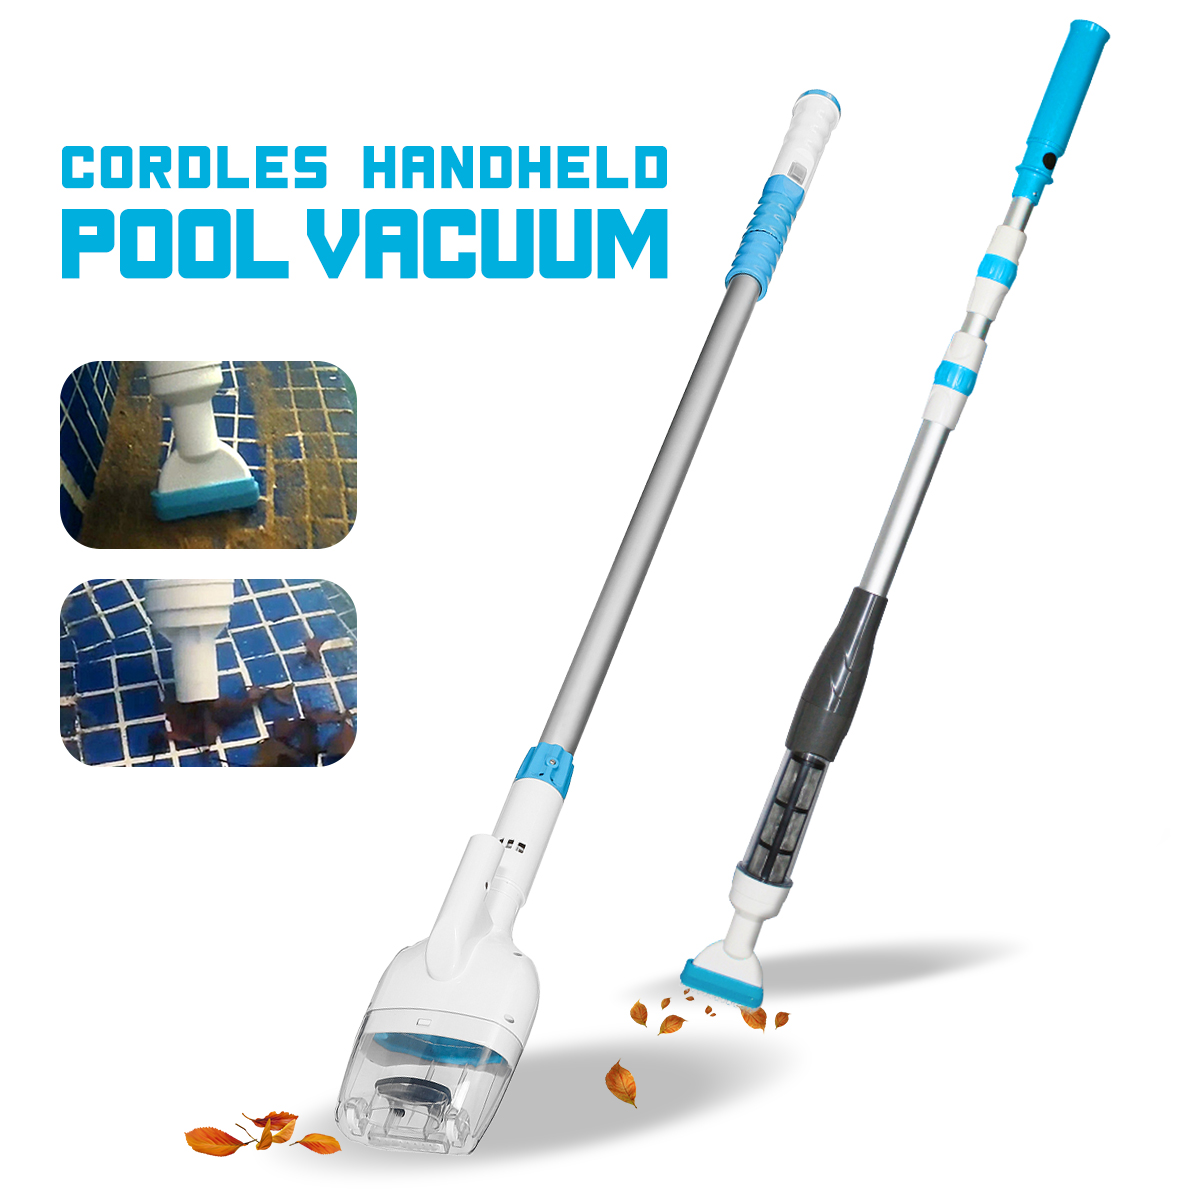 Handheld-Cordless-Swimming-Pool-Vacuum-Cleaner-Waterproof-IPX8-Rechargeable-Vac-Above-Ground-Cleanin-1559729-4